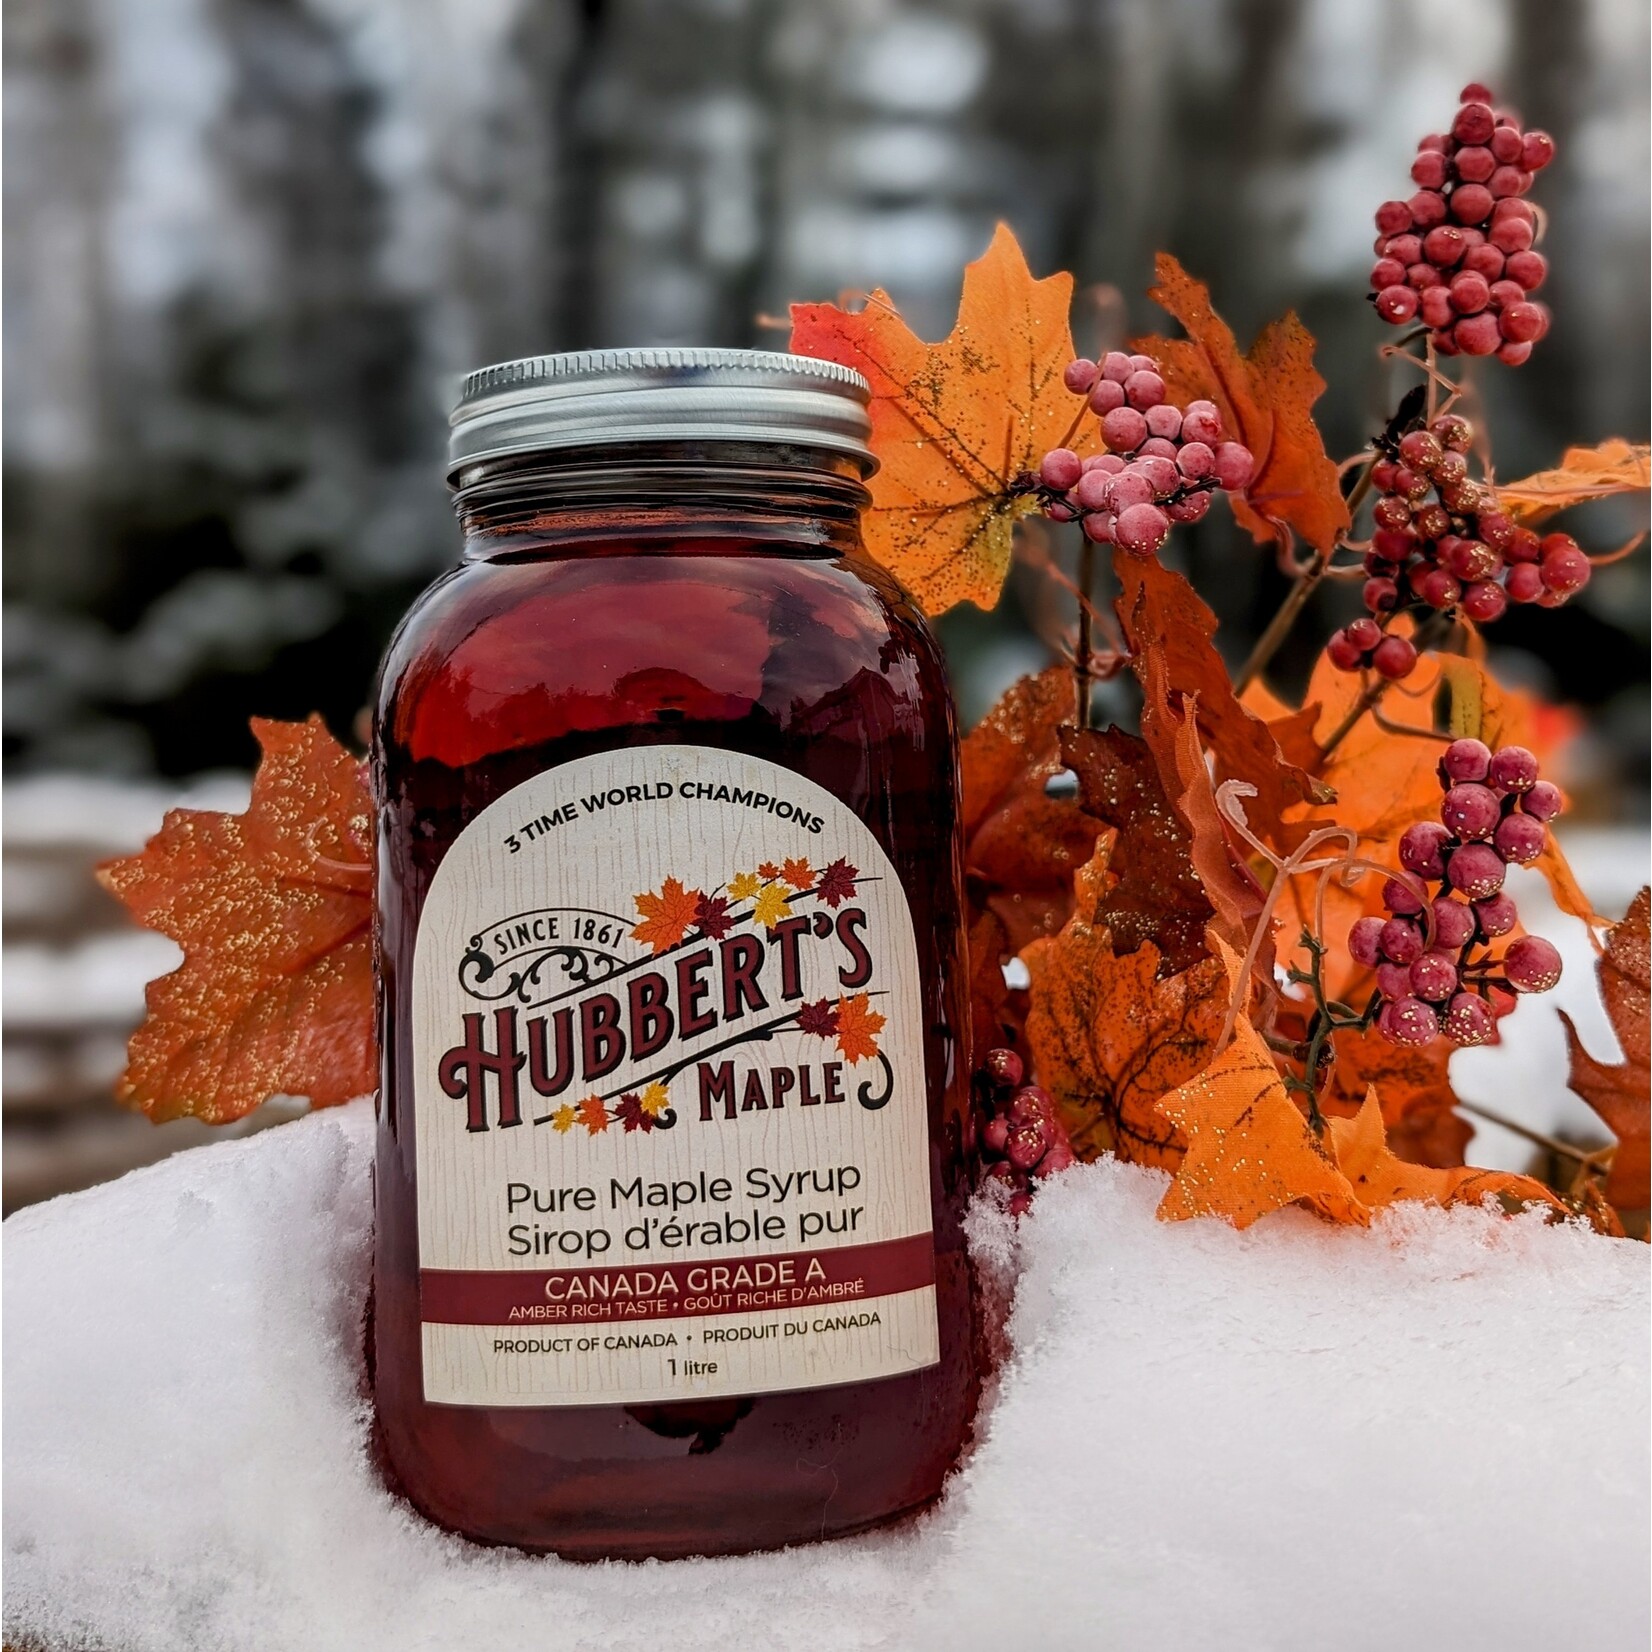 HUBBERT'S MAPLE SYRUP